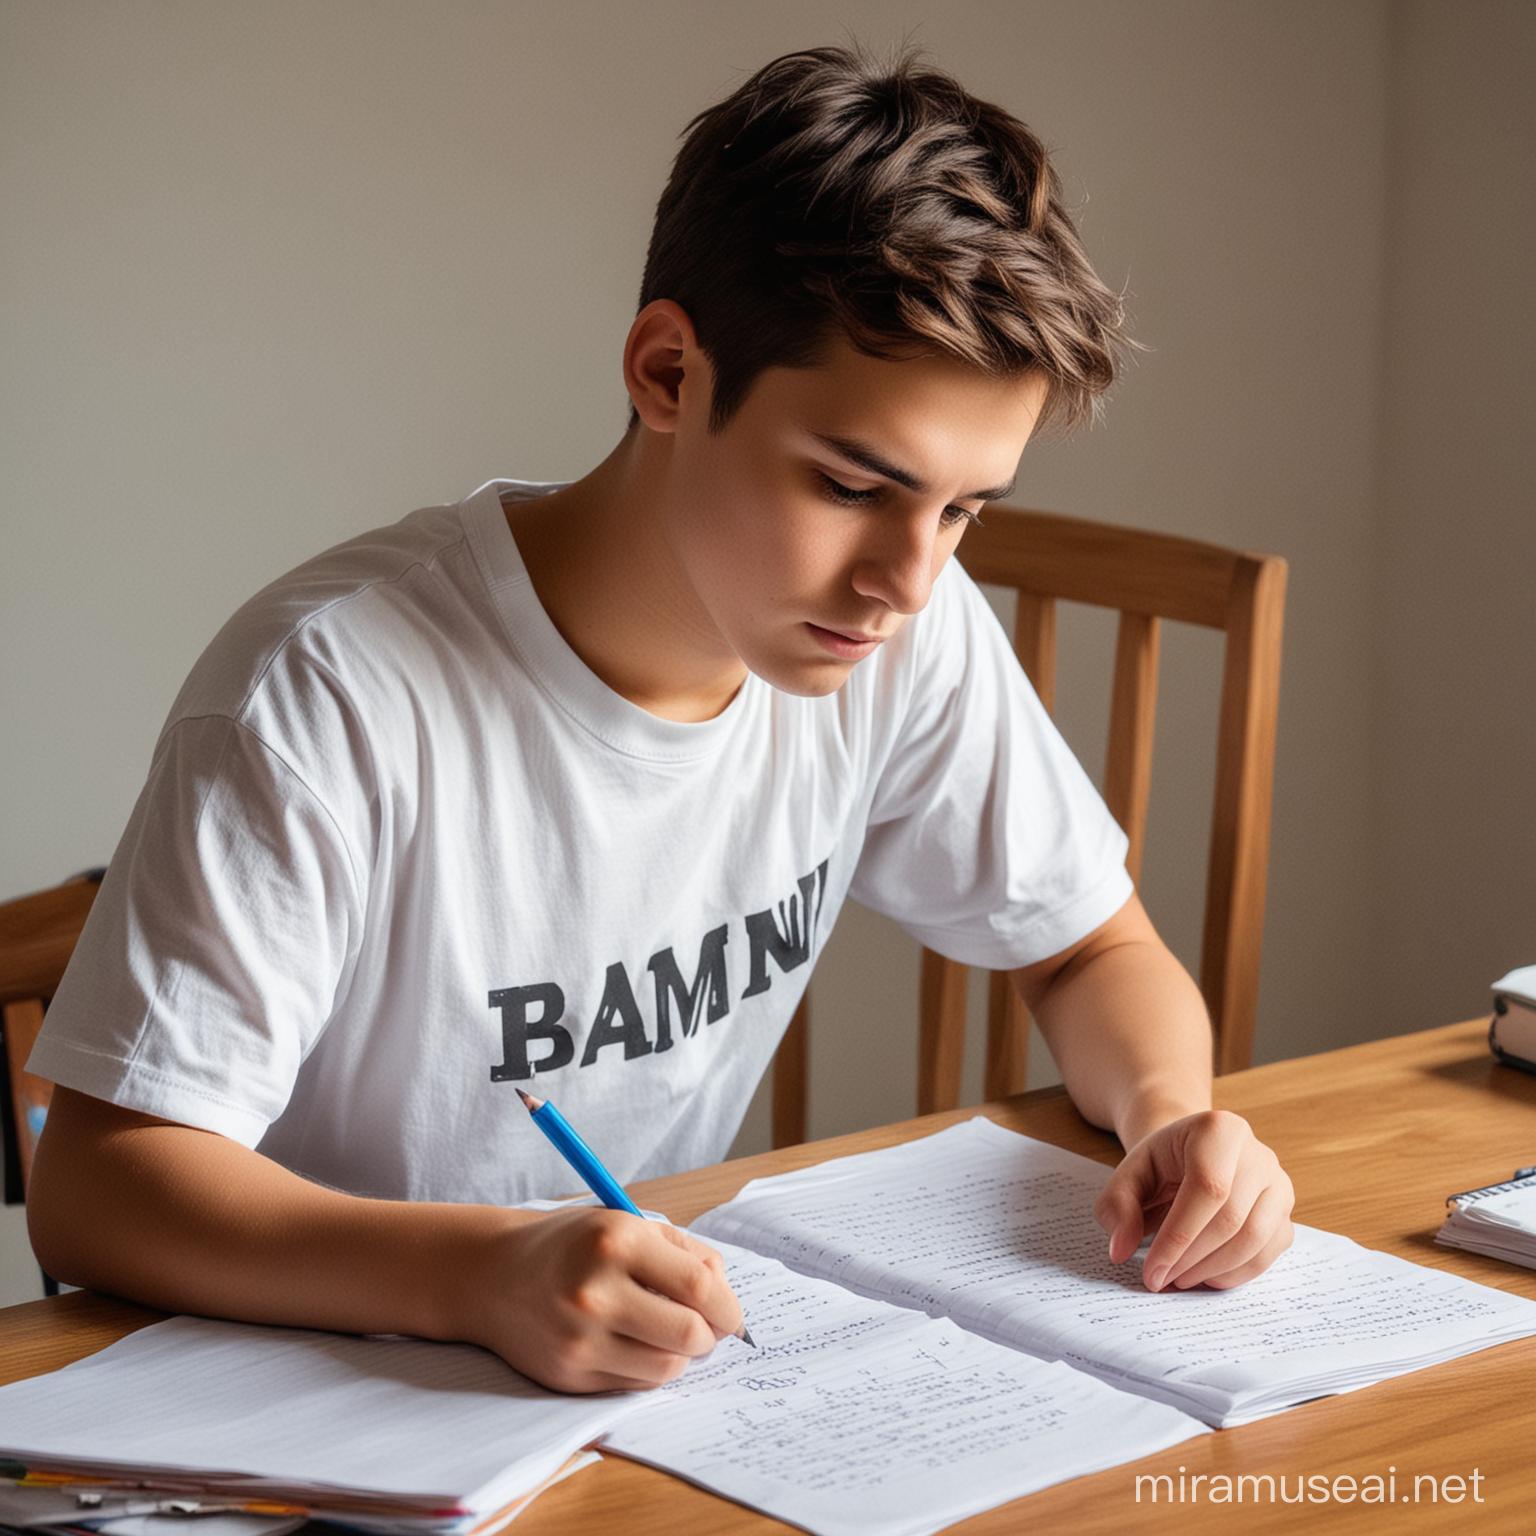 A boy studying hardly, memories notes for the exam, wearing a T-shirt.